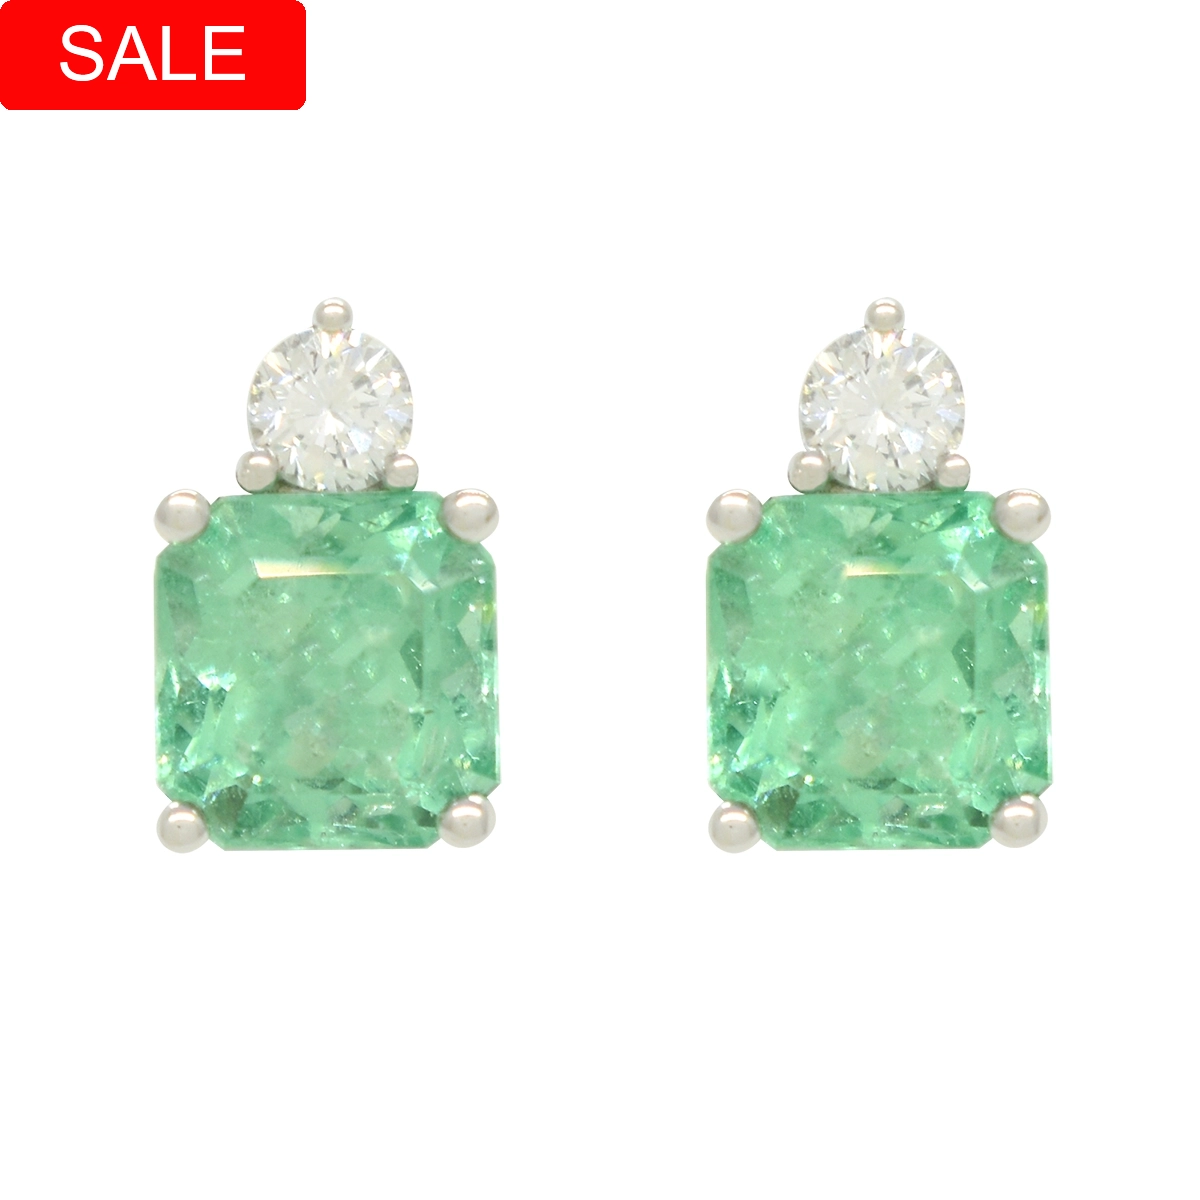 Emerald and diamond stud earrings custom made in 18K white gold with 2.26 Ct. t.w. in 2 stunning emerald-cut natural emeralds and 0.20 Ct. t.w. in 2 round-cut genuine diamonds